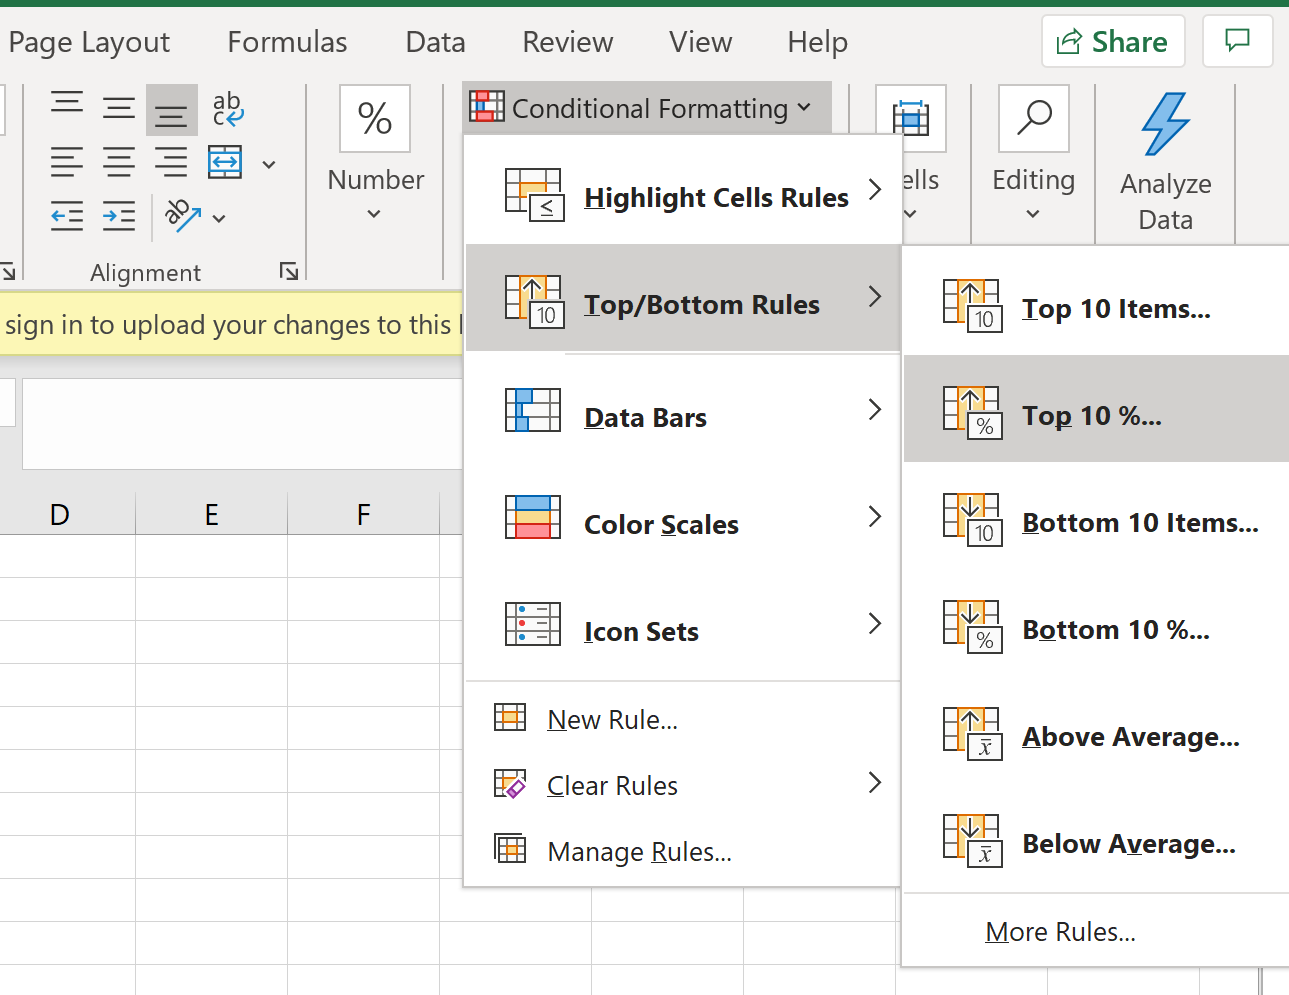 Highlight top 10% of values in Excel